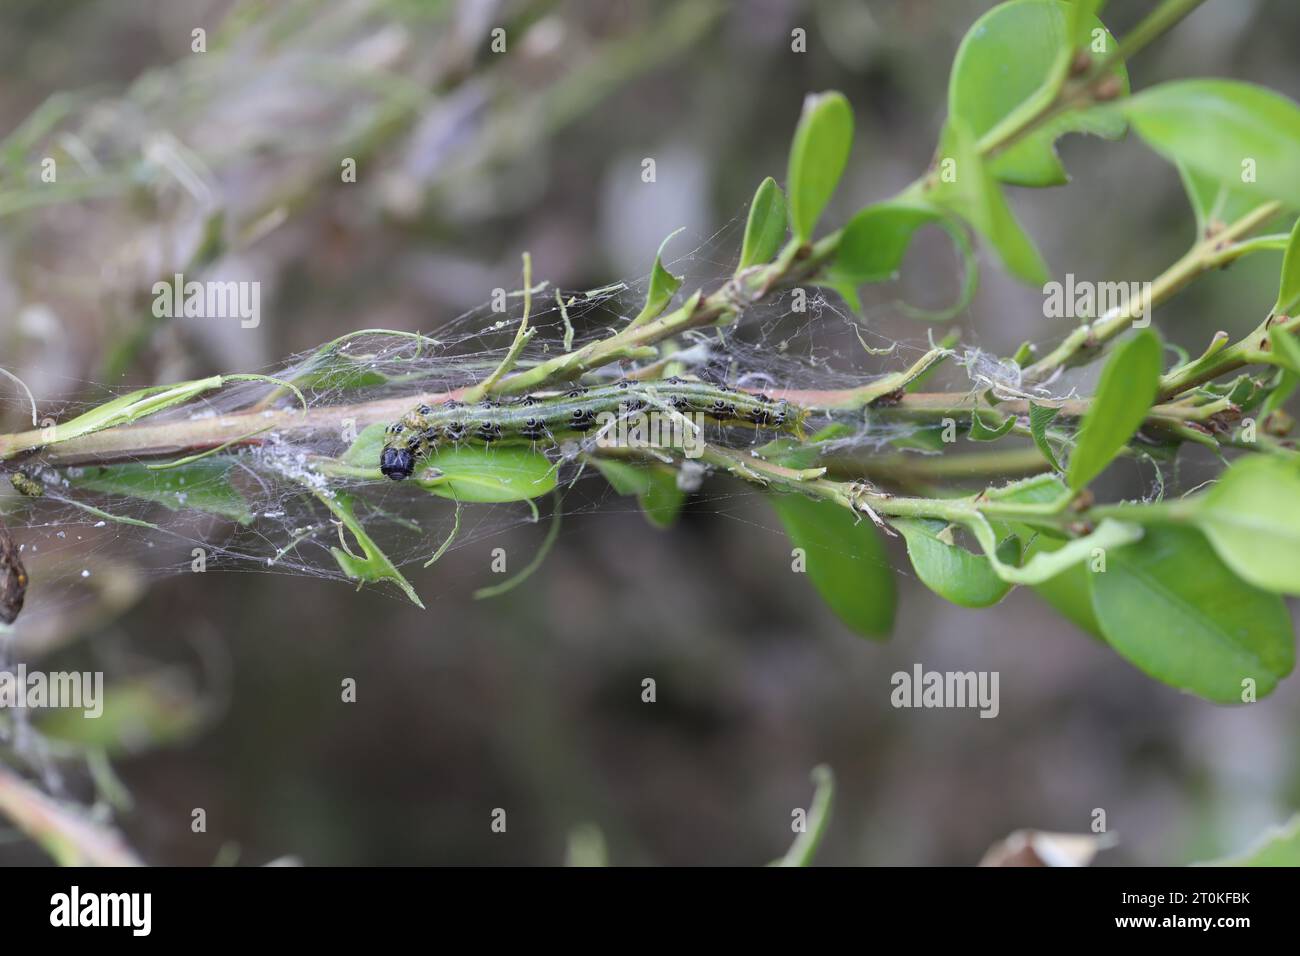 Boxwood shrub infested and destroyed by caterpillars of Box Tree Moth (Cydalima perspectalis). Stock Photo